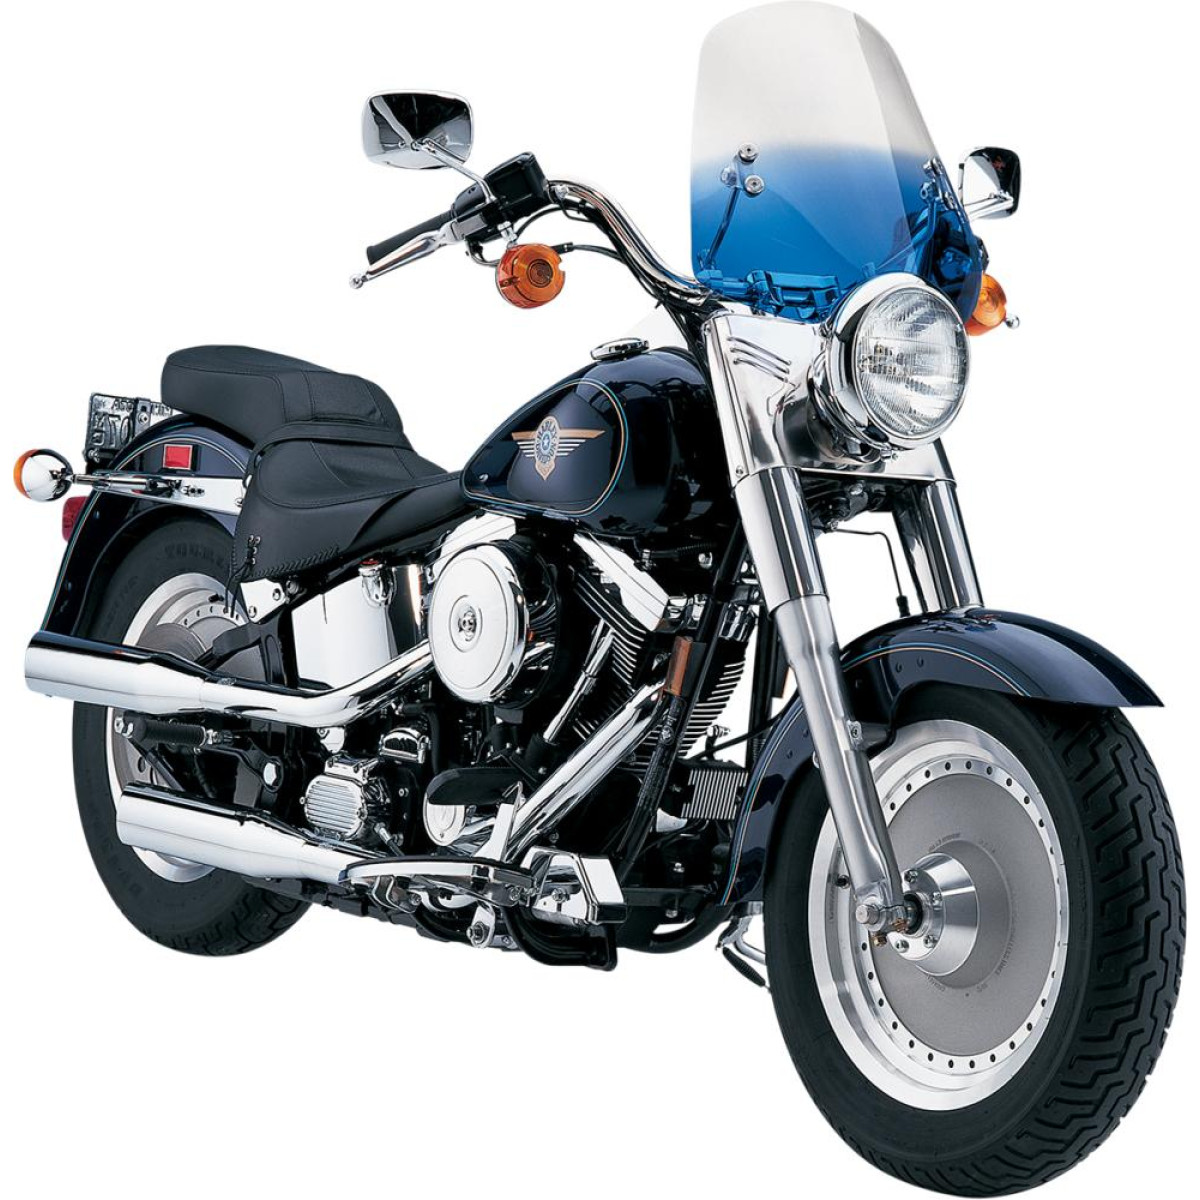 H/D WINDSHIELD REPLACEMENT HANDLEBAR MOUNT WINDSHIELD REPLACEMENT THE SHOOTER 14" GRADIENT BLUE